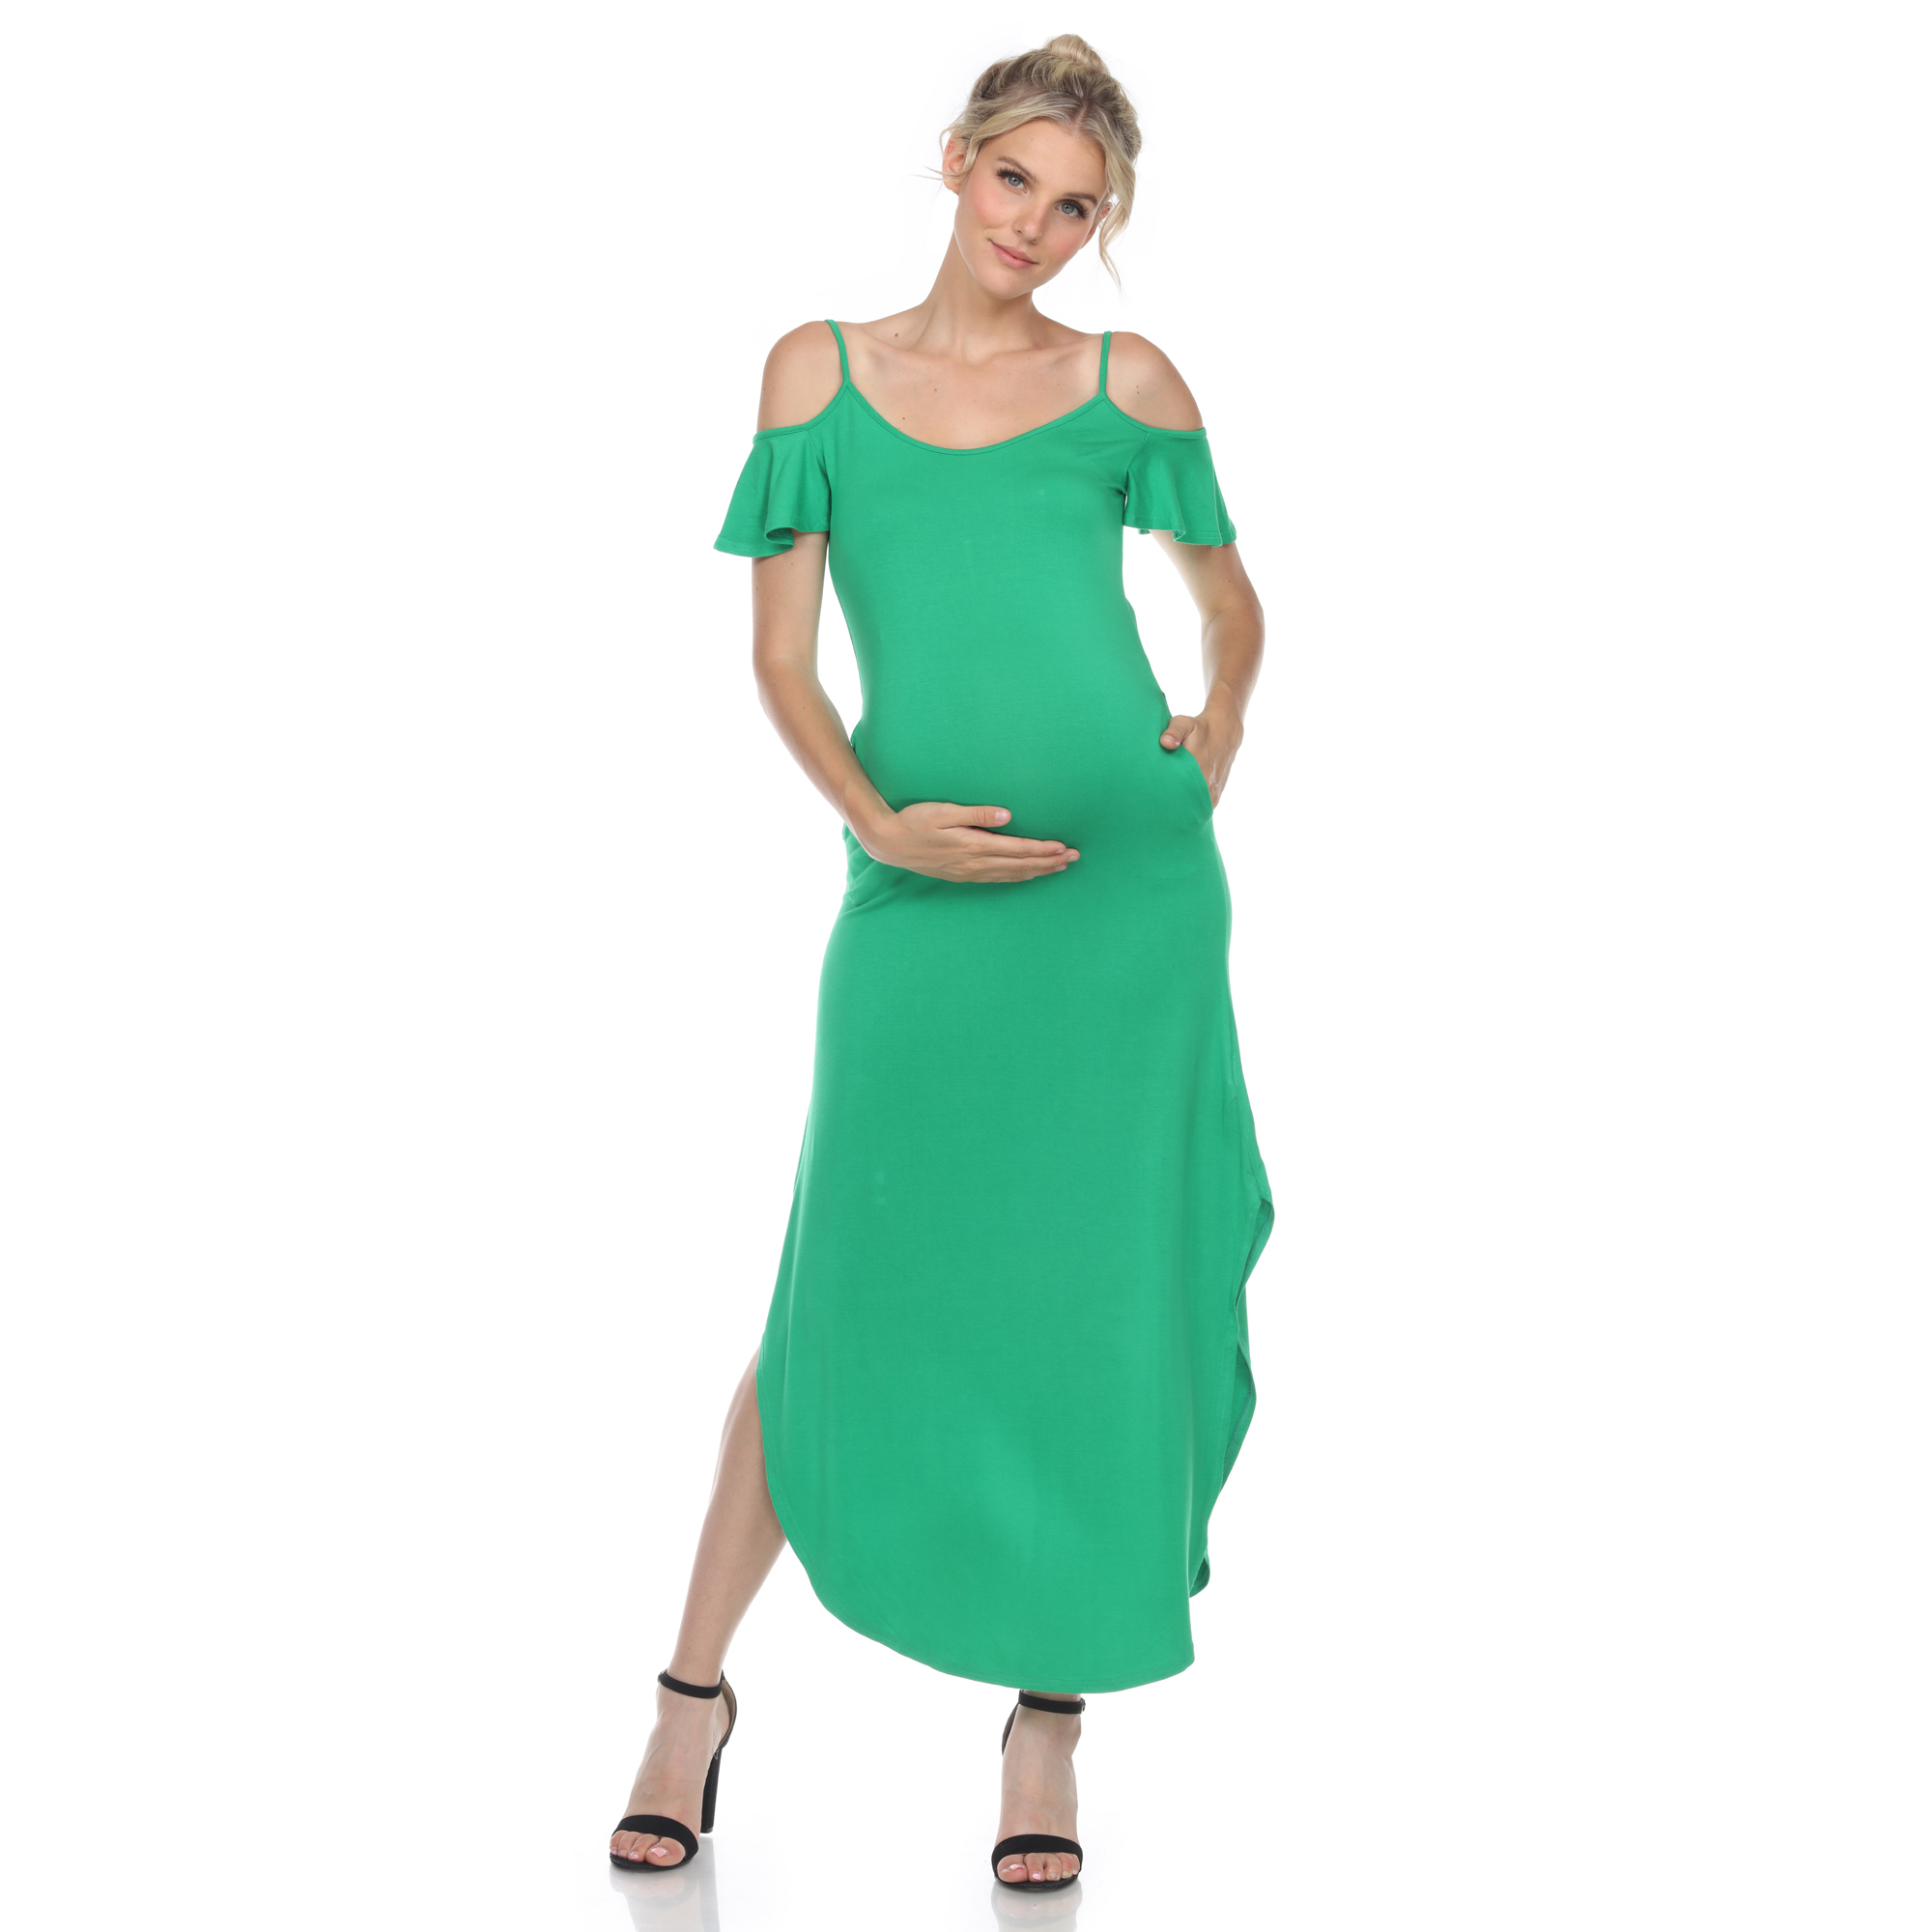 White Mark Women's Maternity Cold Shoulder Maxi Dress - Green, Large